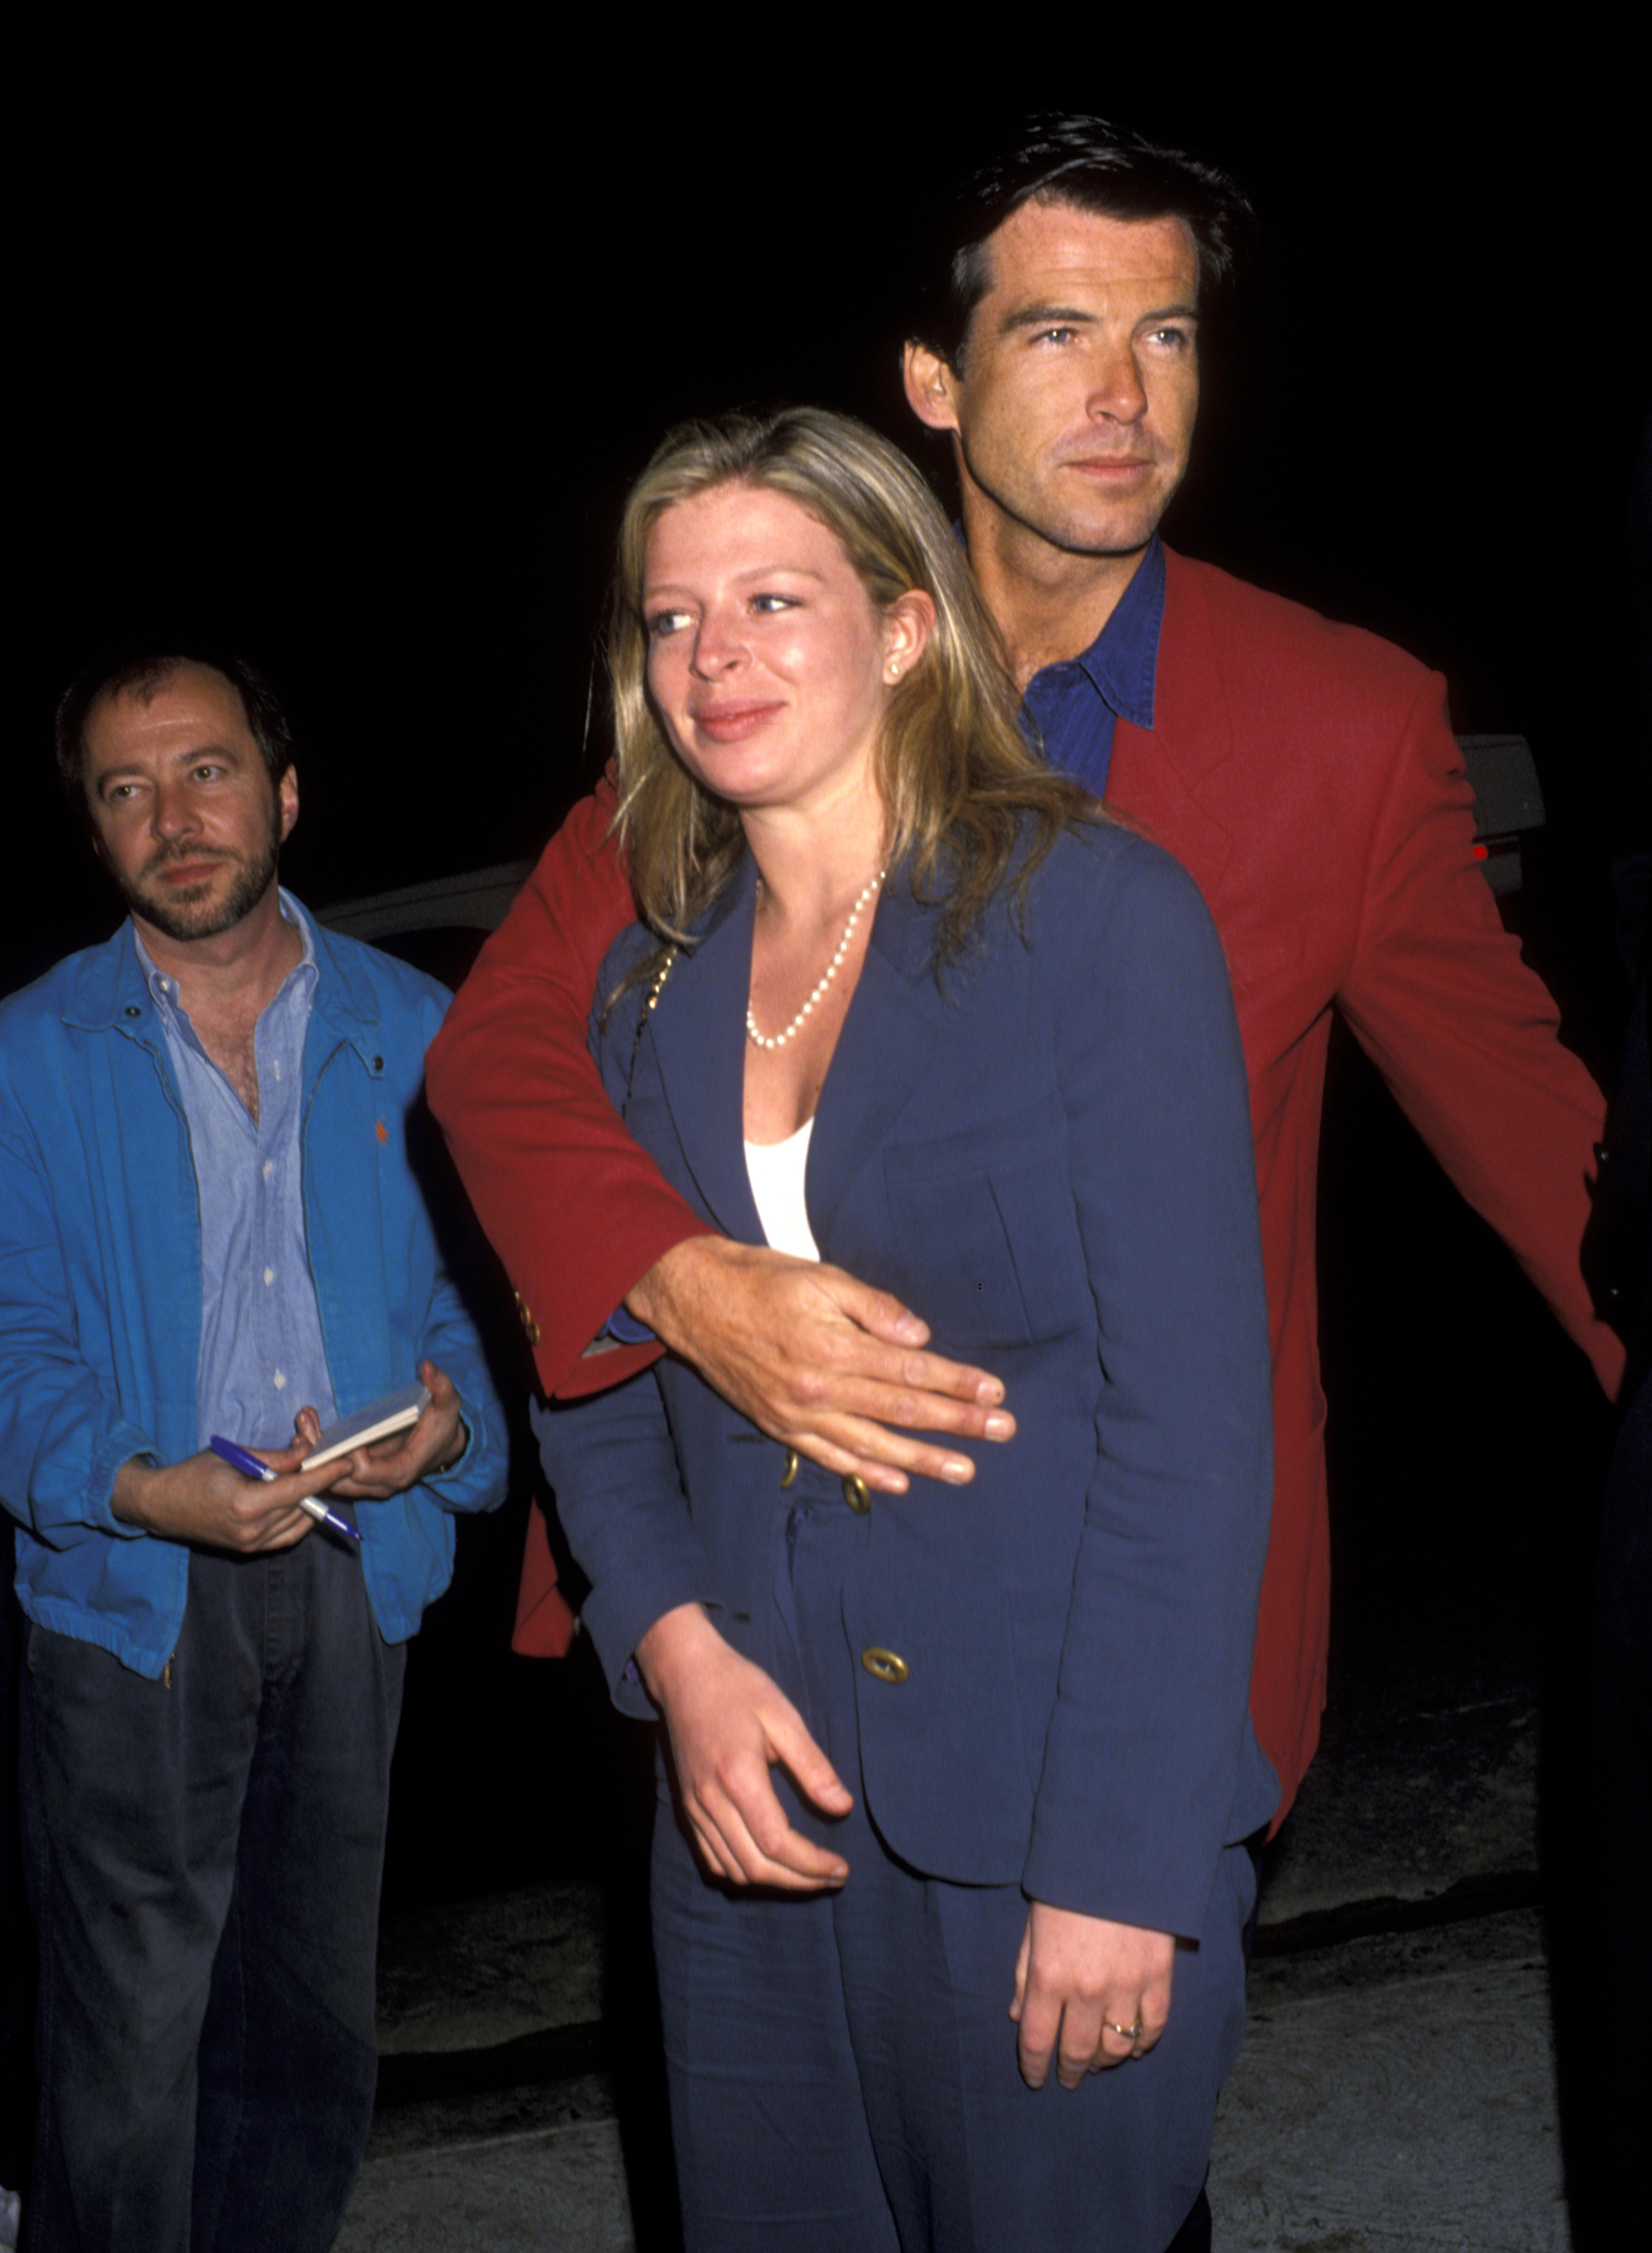 Pierce Brosnan and his daughter Charlotte in Los Angeles in 1993 | Source: Getty Images